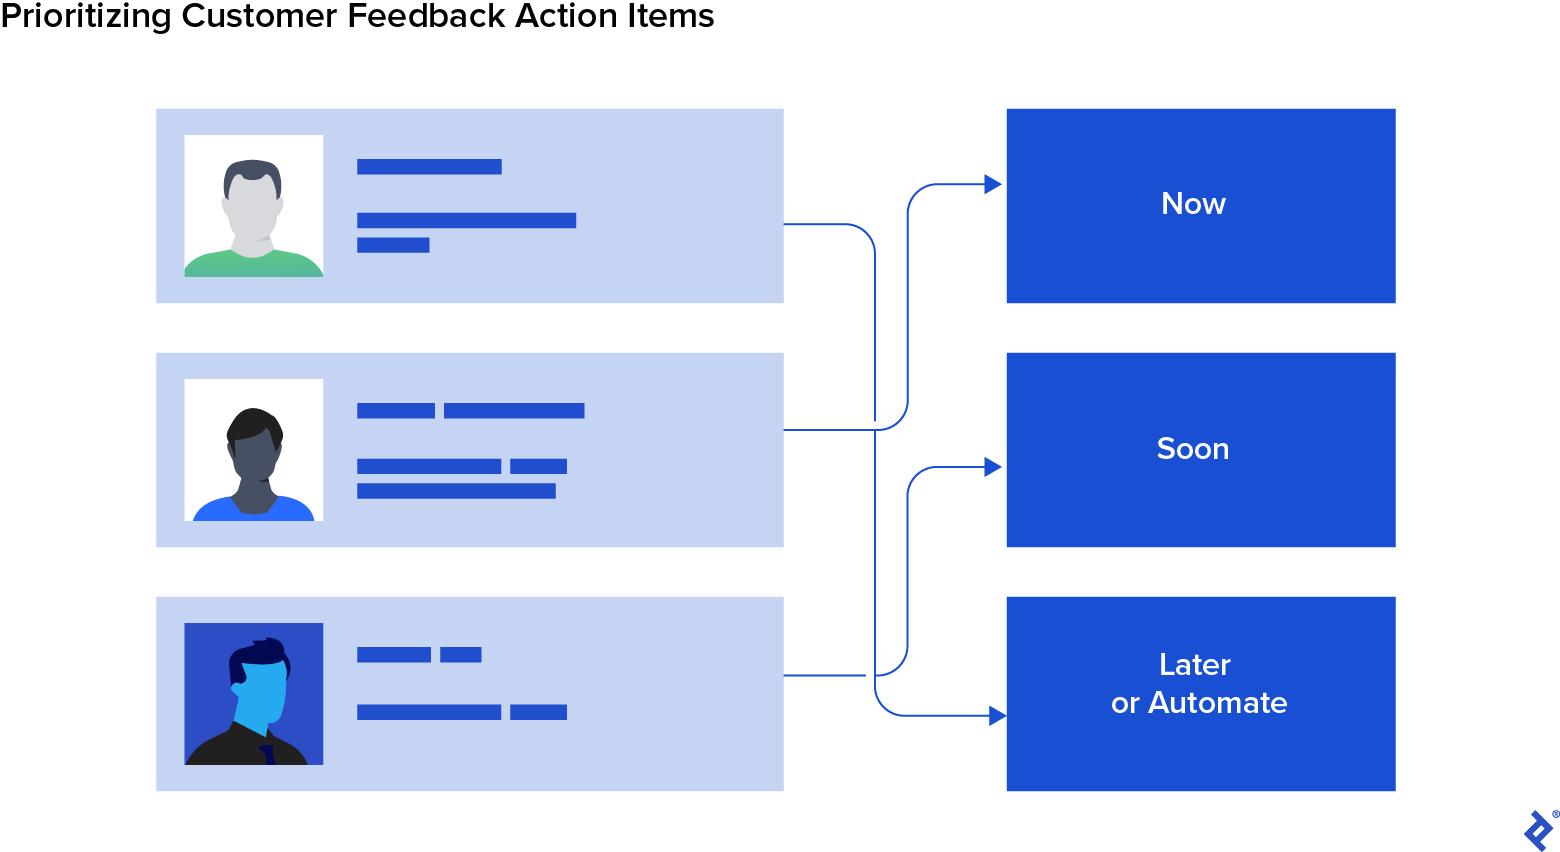 The GAP voice of the customer strategy sorts action items by urgency: “Now,” “Soon,” and “Later or Automate.”